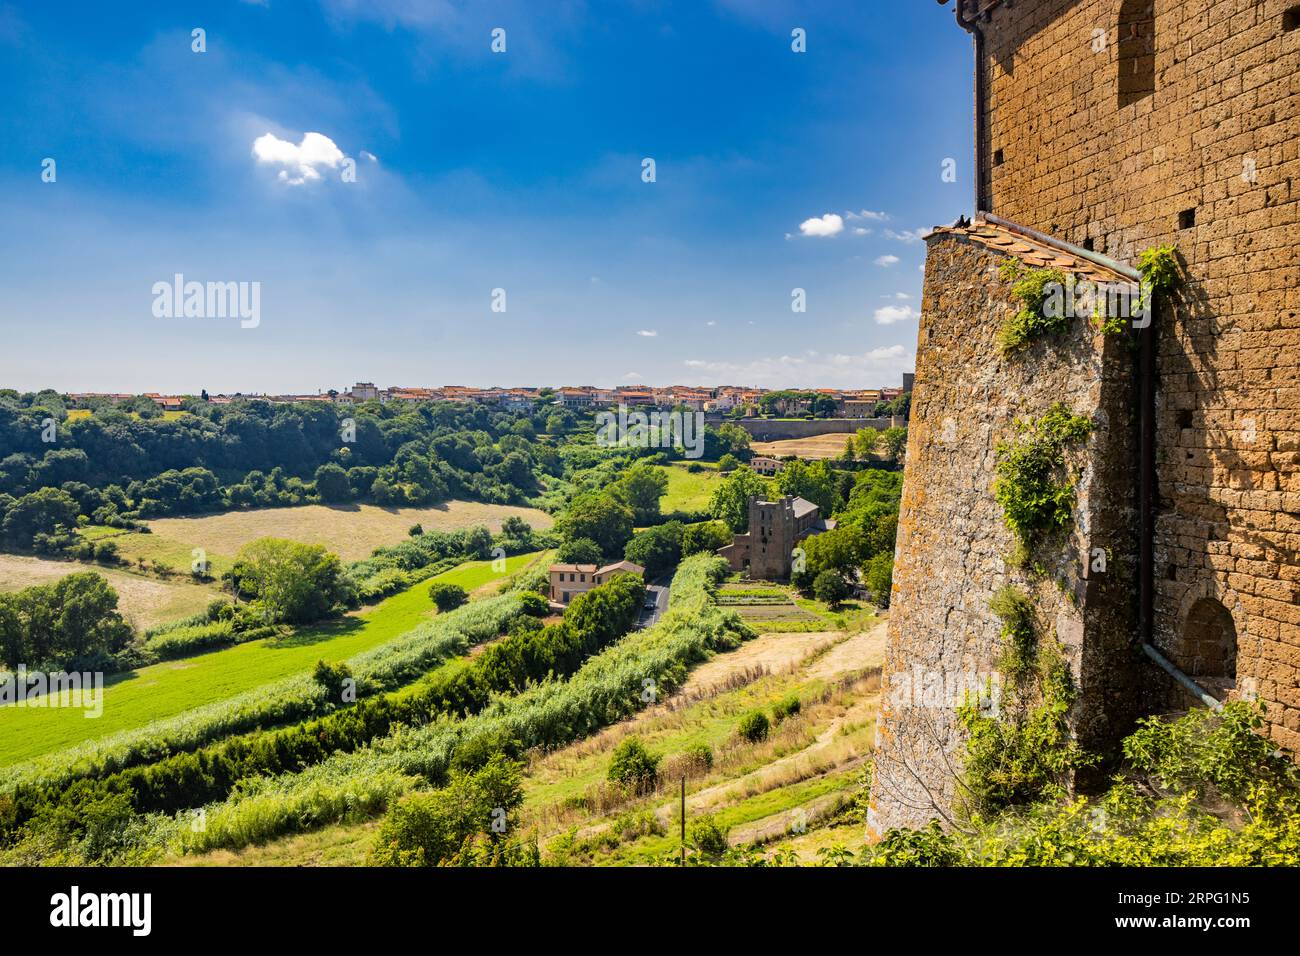 Tuscania, Viterbo, Lazio. A view of the ancient medieval village of Tuscania, city of the Etruscans, from the top of the hill that rises in front of t Stock Photo